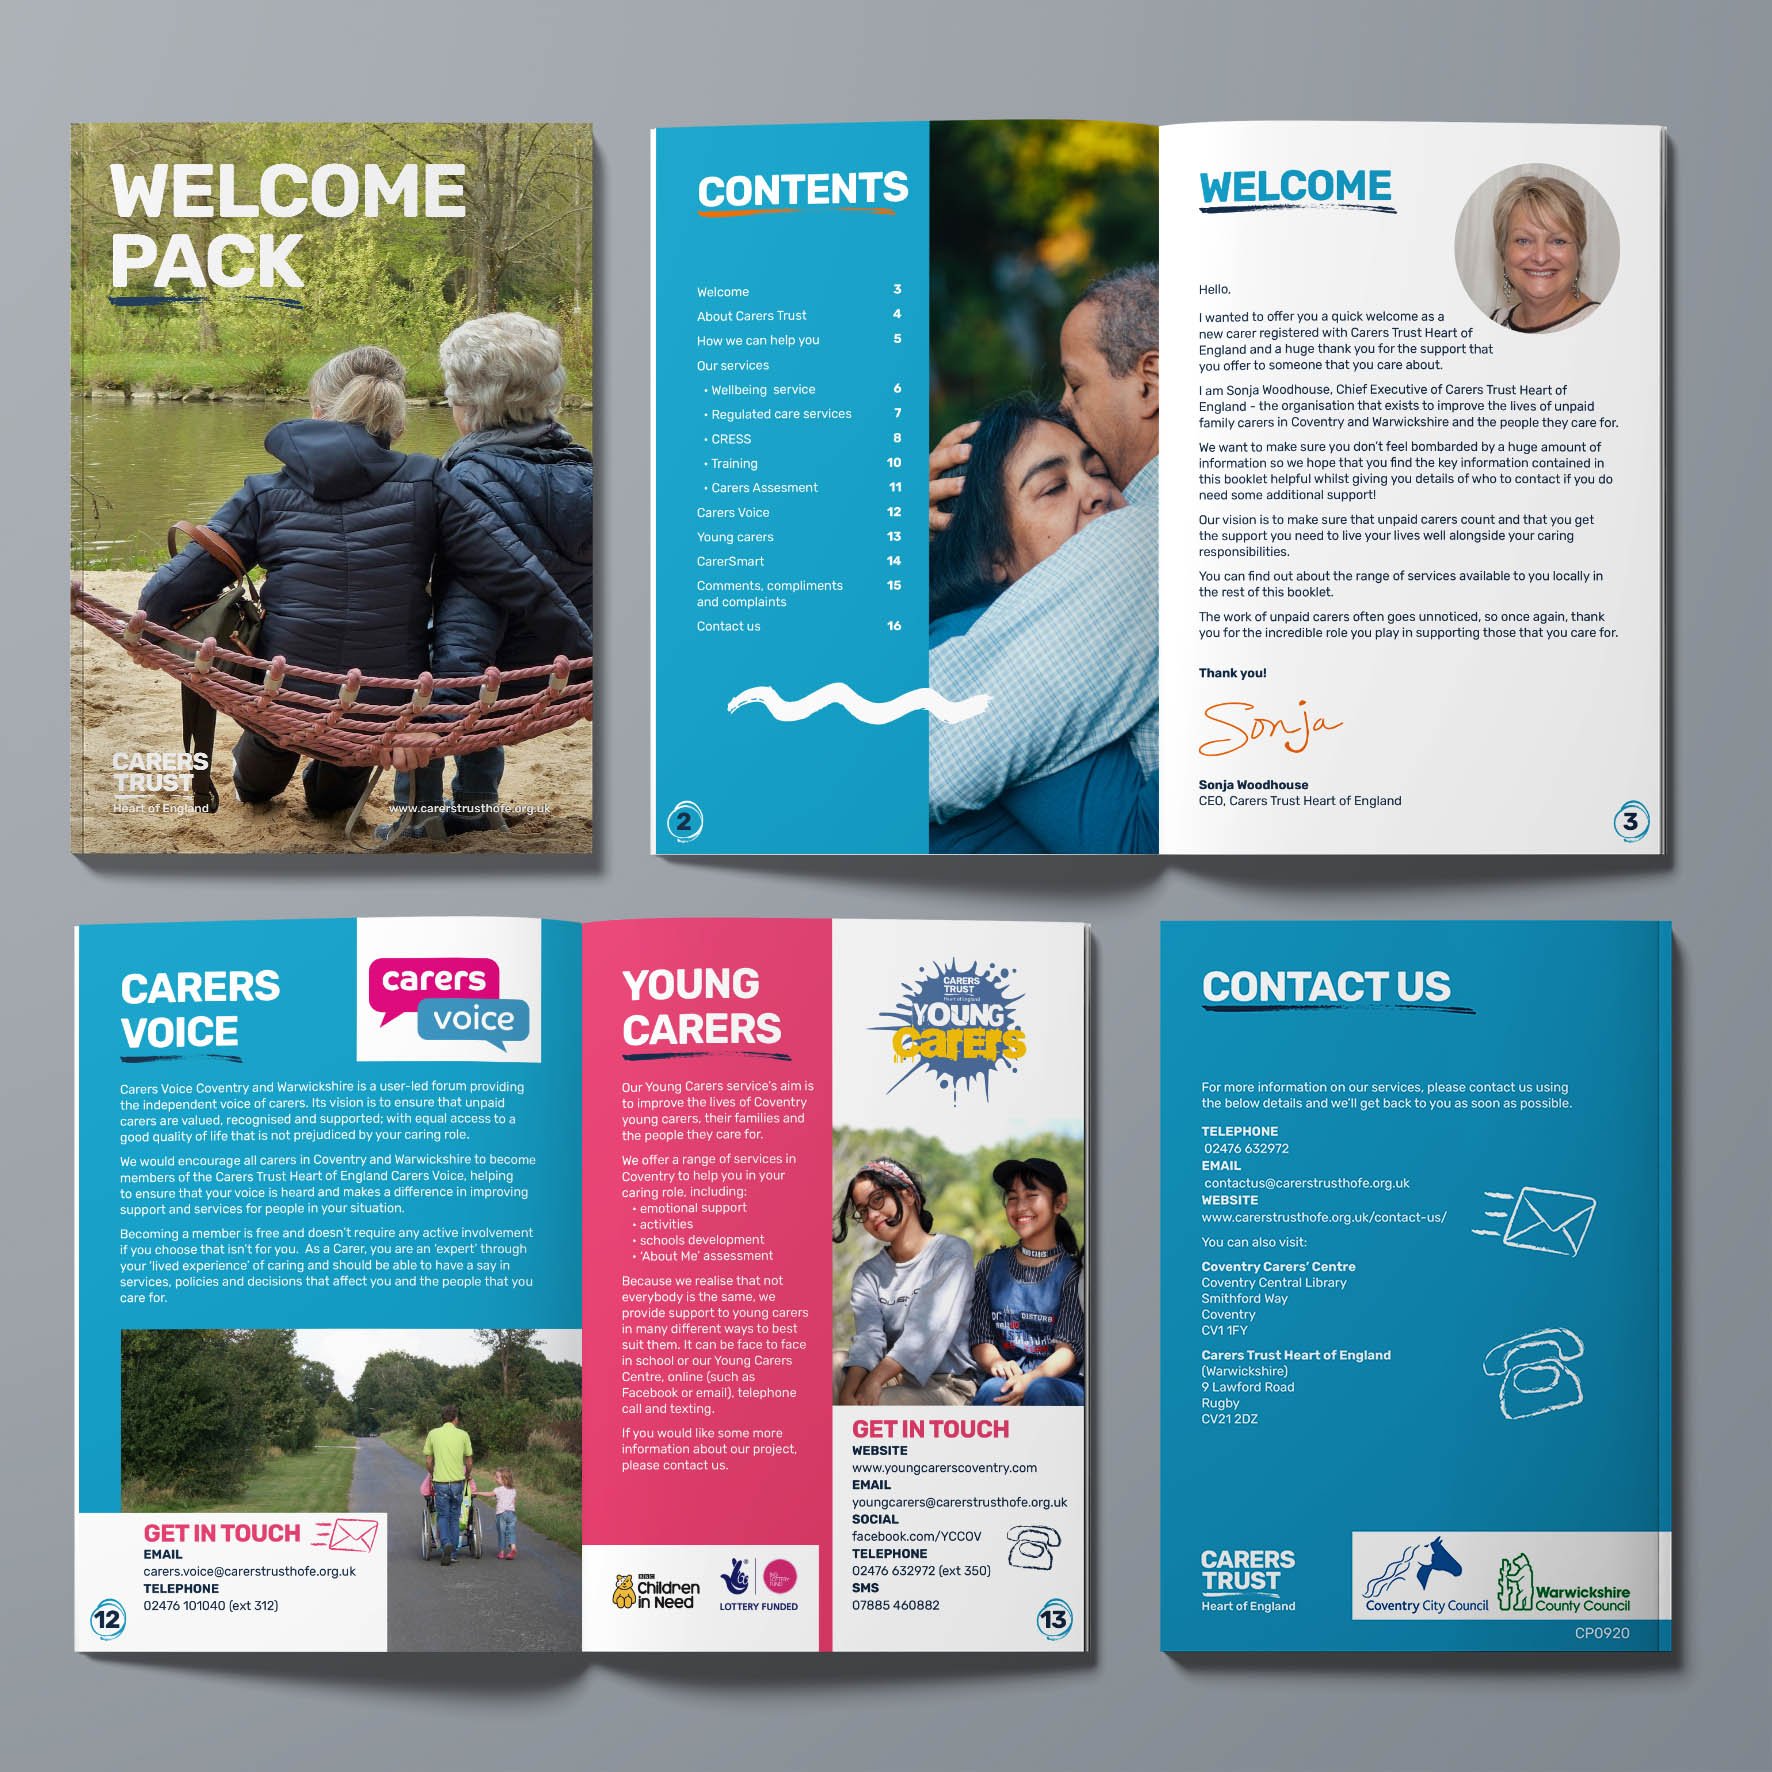 Zapped Marketing - Carers Trust Heart of England Welcome Pack Rebrand